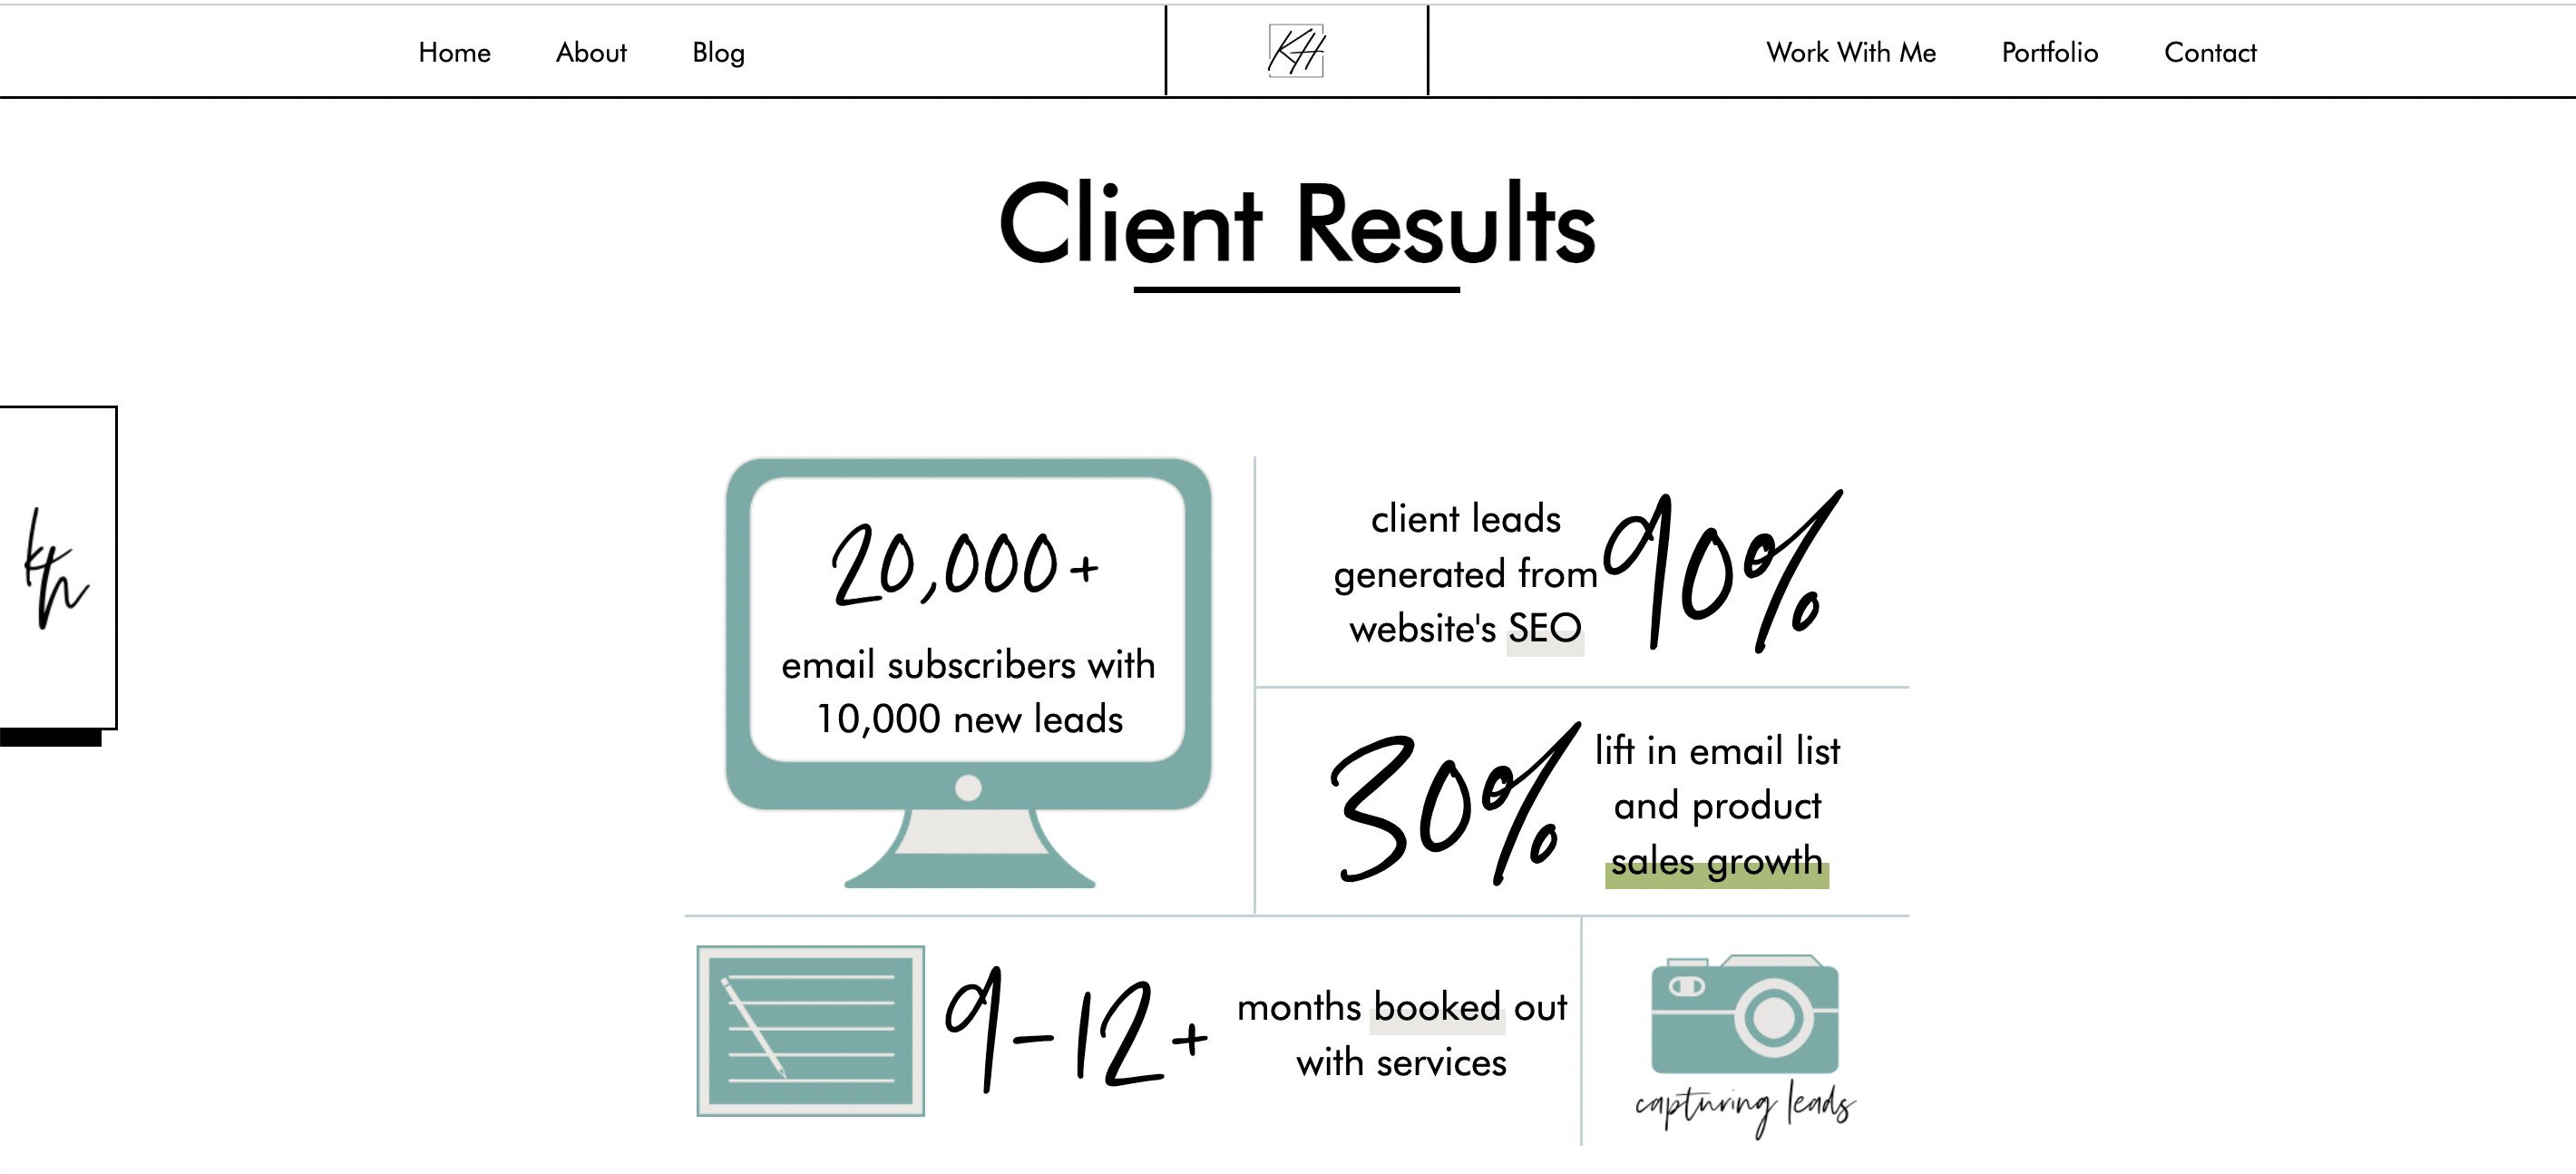 Client results section of Kayla Hollatz’s website showing leads, waitlist, and new subscribers.